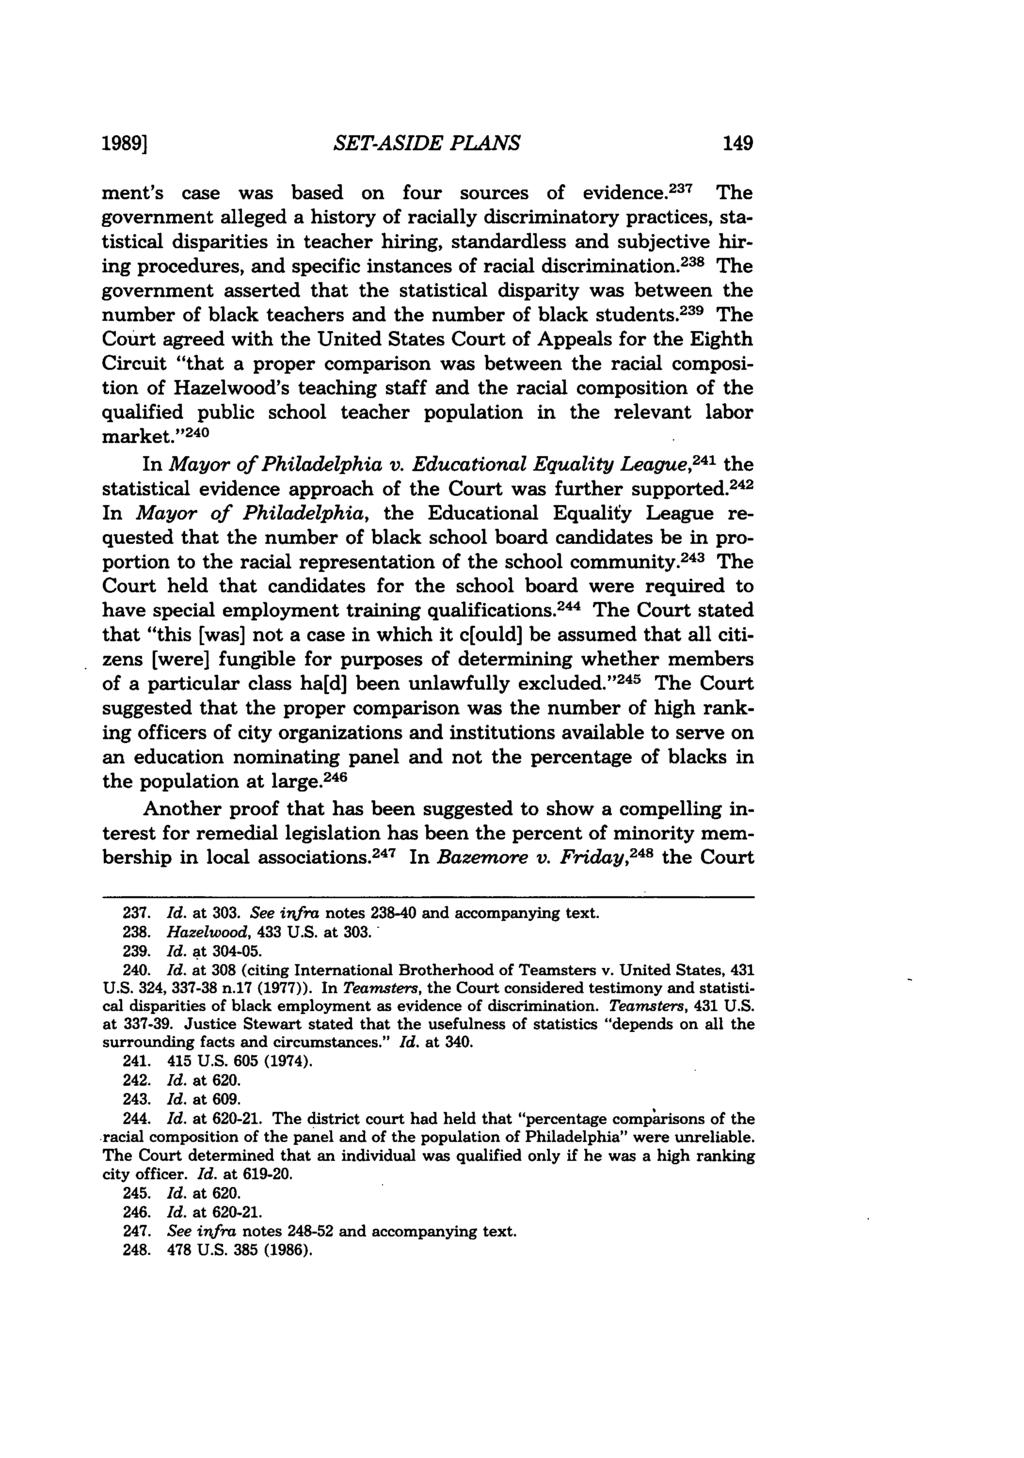 1989] SET-ASIDE PLANS ment's case was based on four sources of evidence.